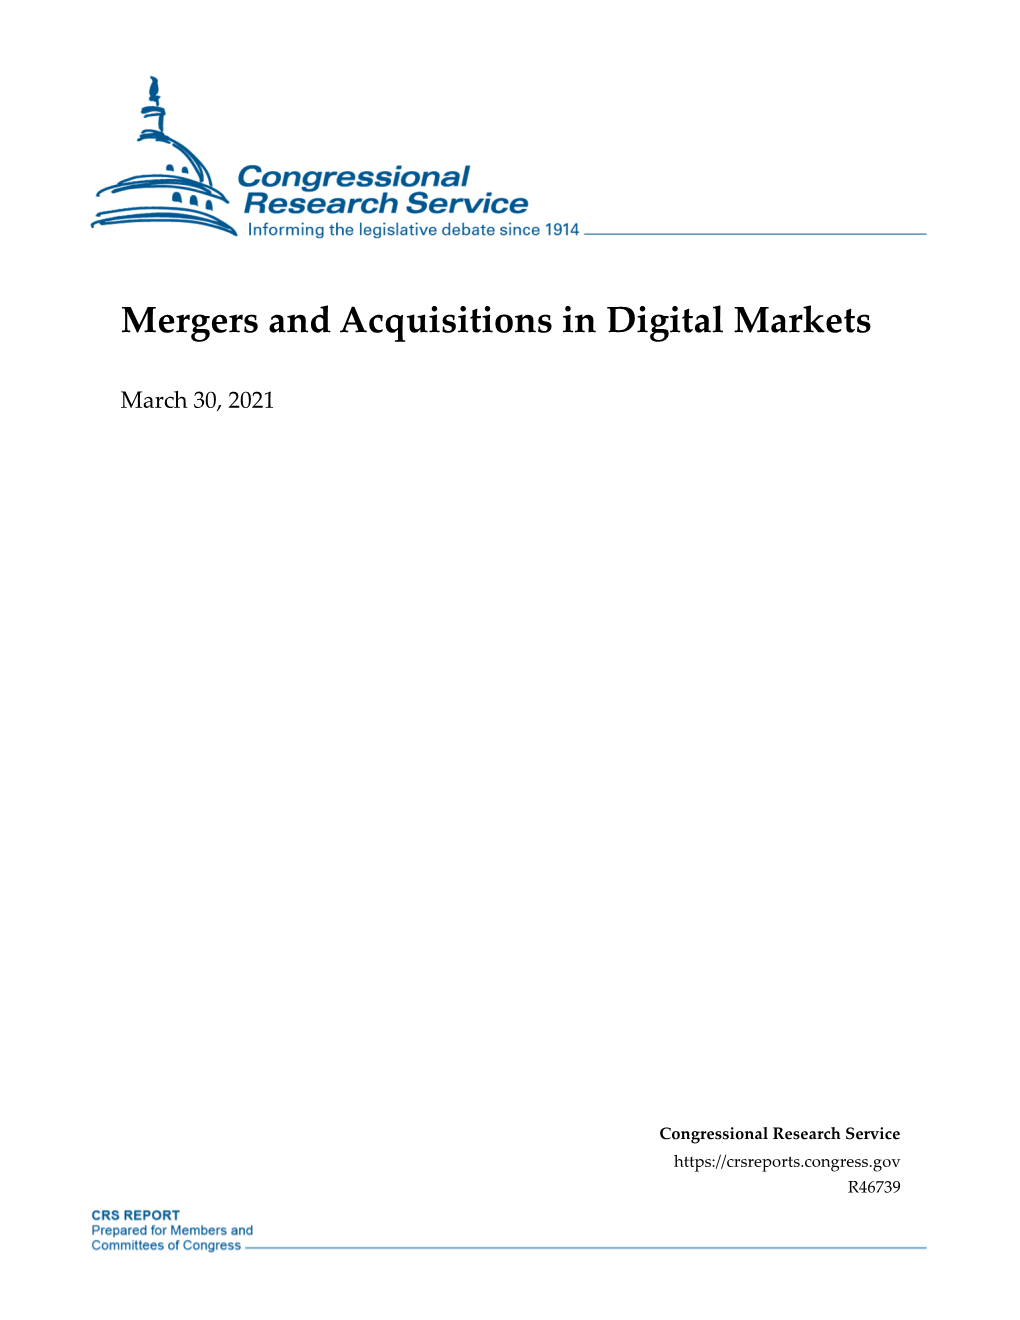 Mergers and Acquisitions in Digital Markets